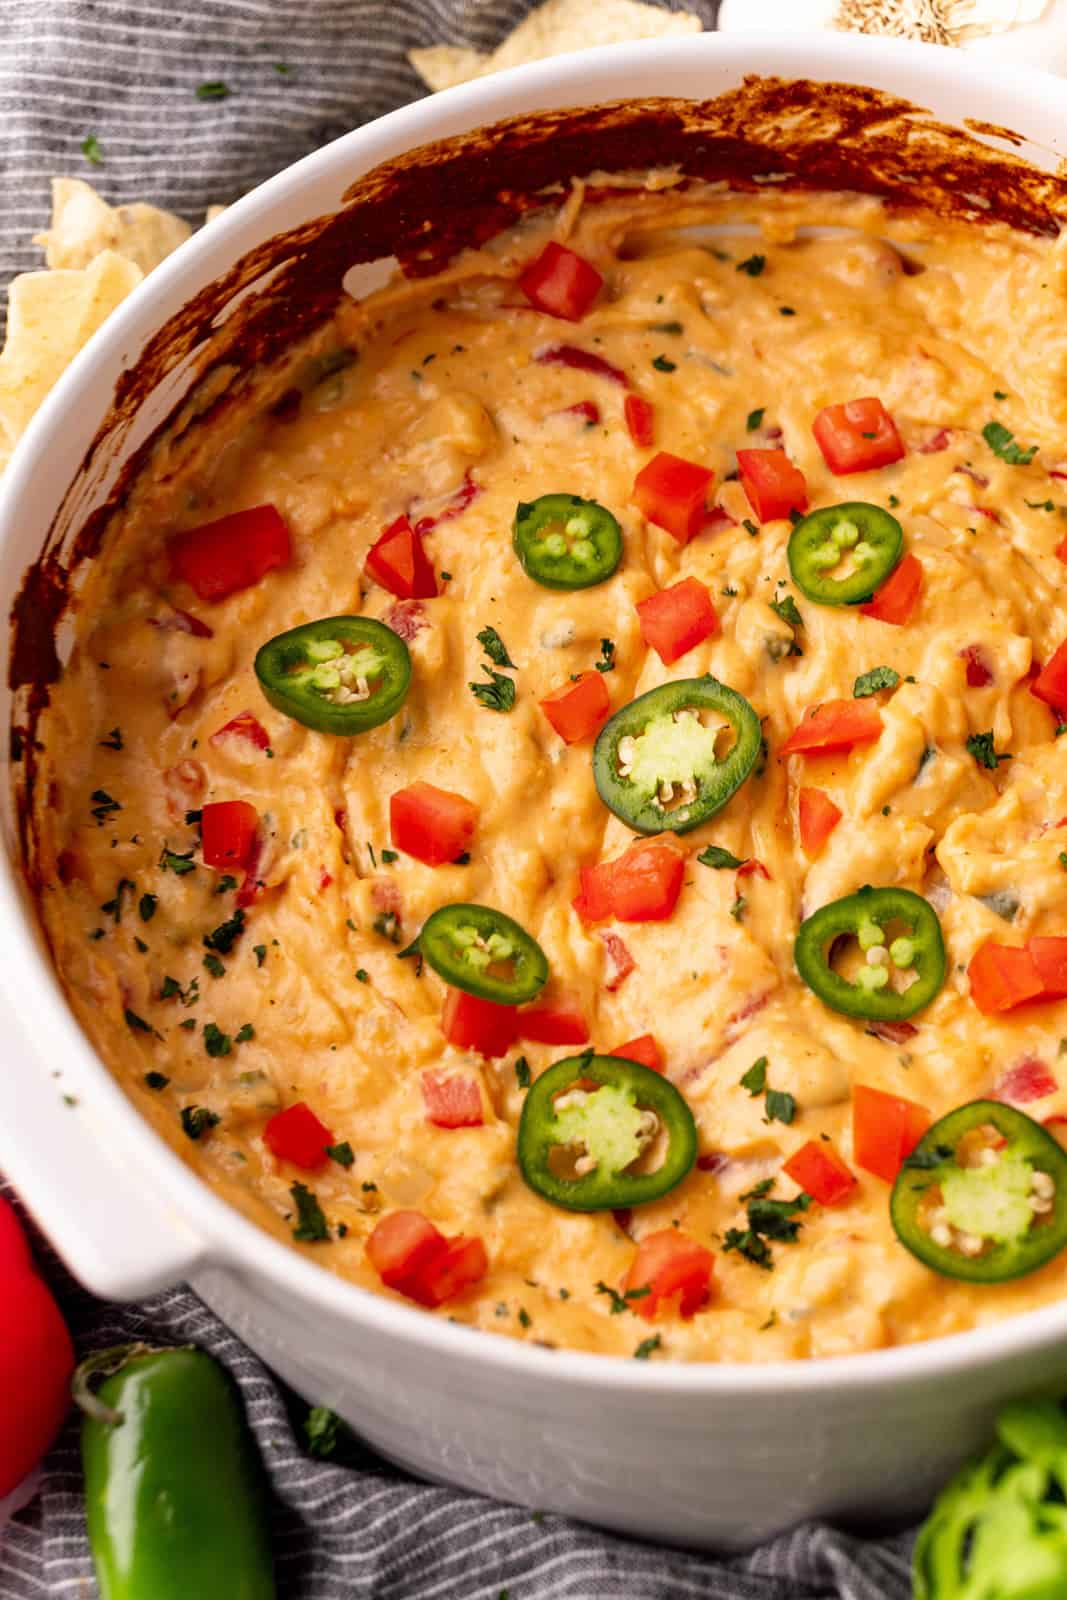 Deliciously Cheesy: Pie De Queso Recipe That Will Leave You Craving More